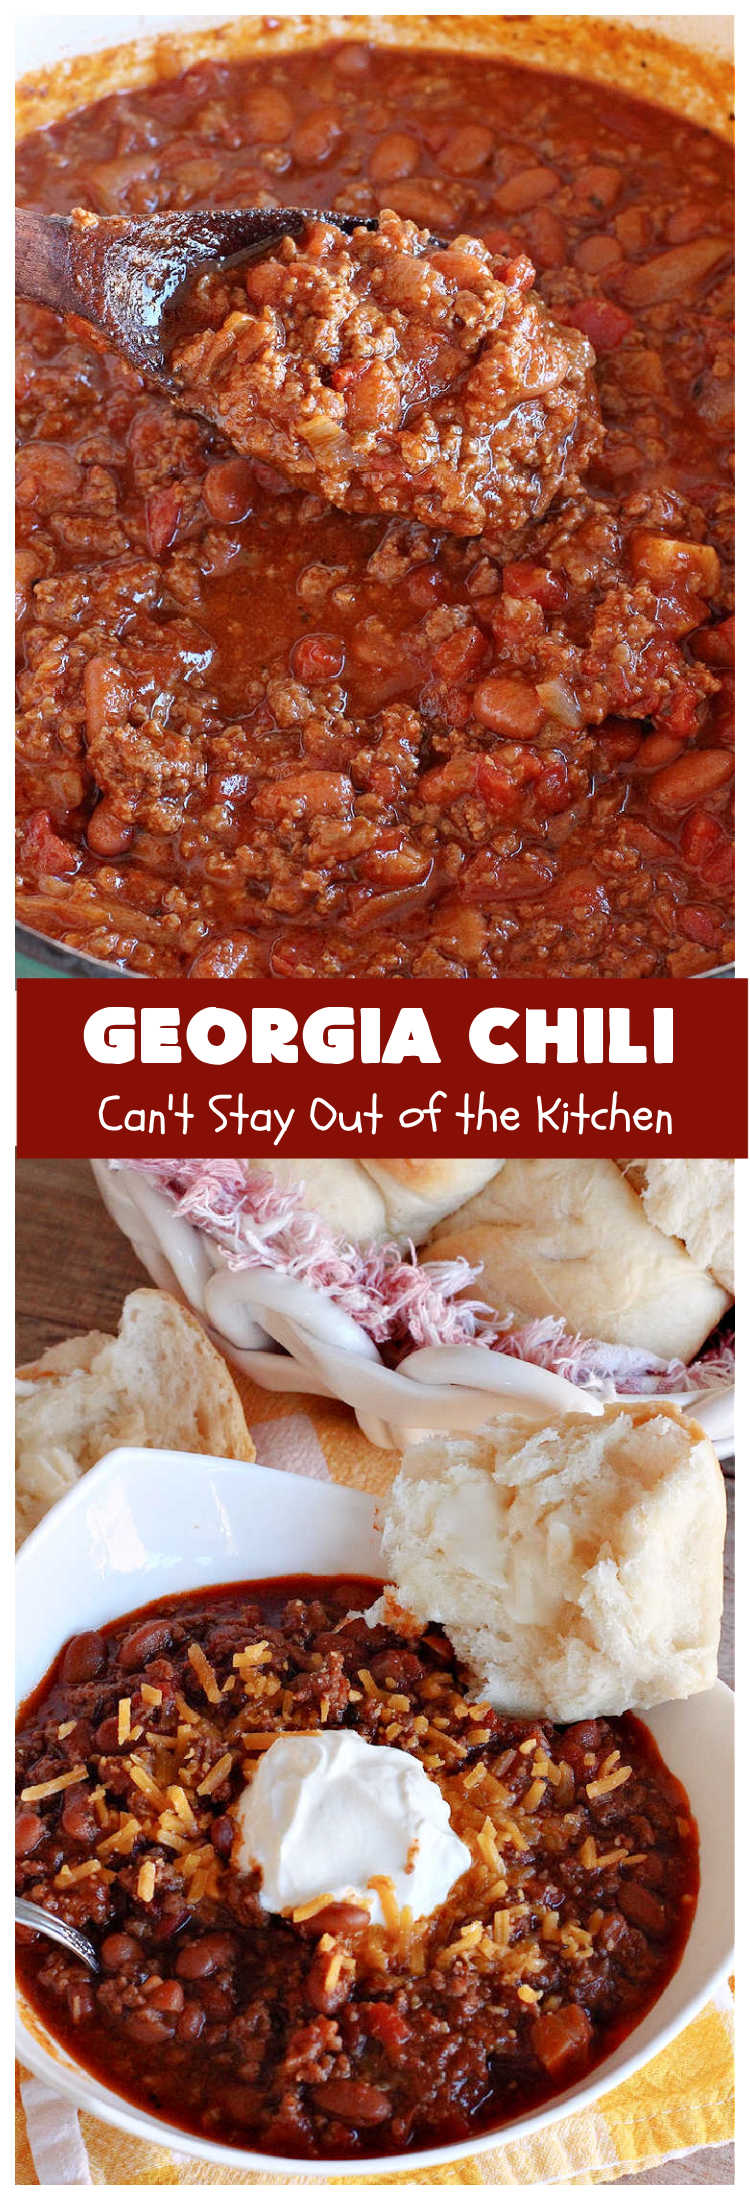 Georgia Chili | Can't Stay Out of the Kitchen